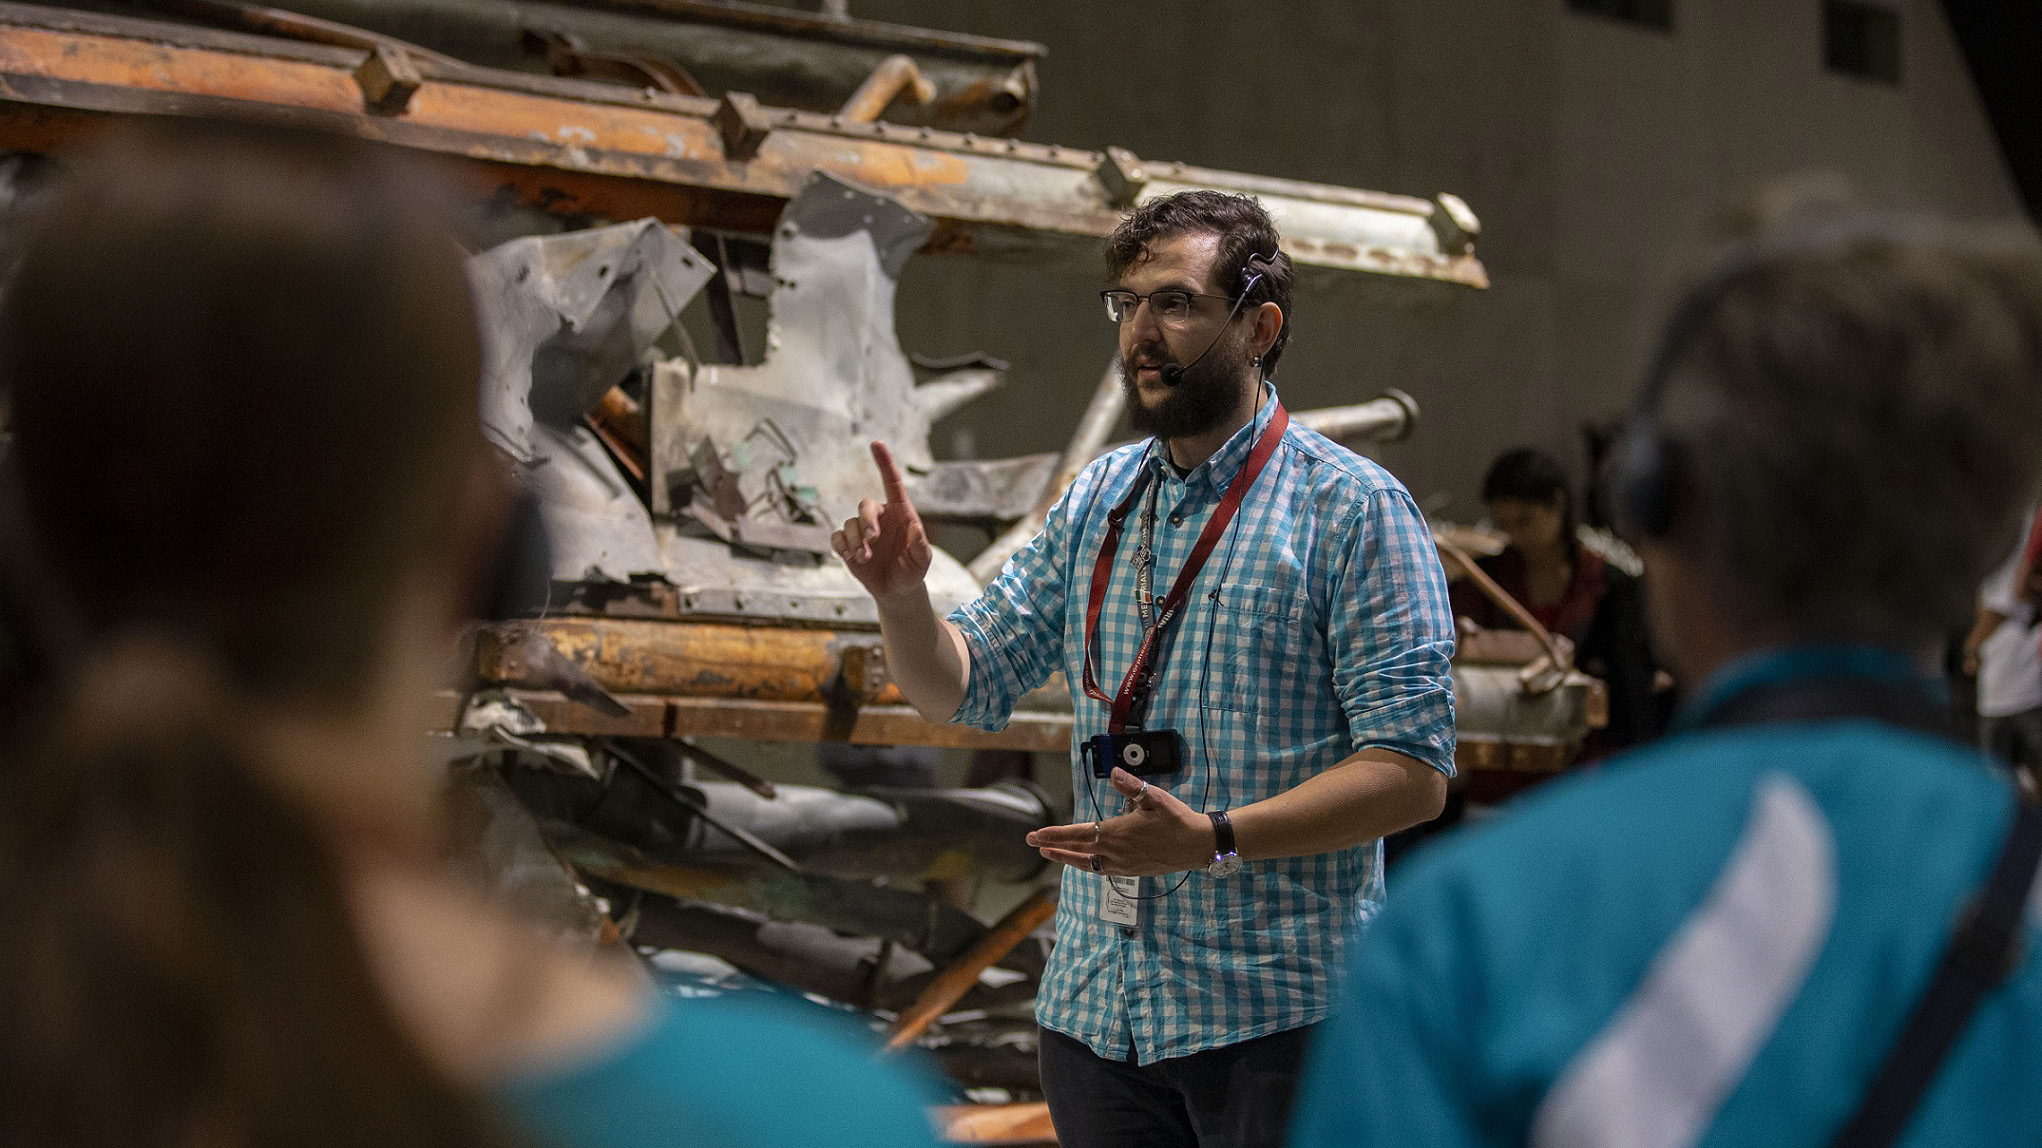 A bearded young male tour guide, standing in front of a mangled segment of an antenna recovered from the World Trade Center, gestures as talks to visitors on a tour of the 9/11 Memorial Museum.